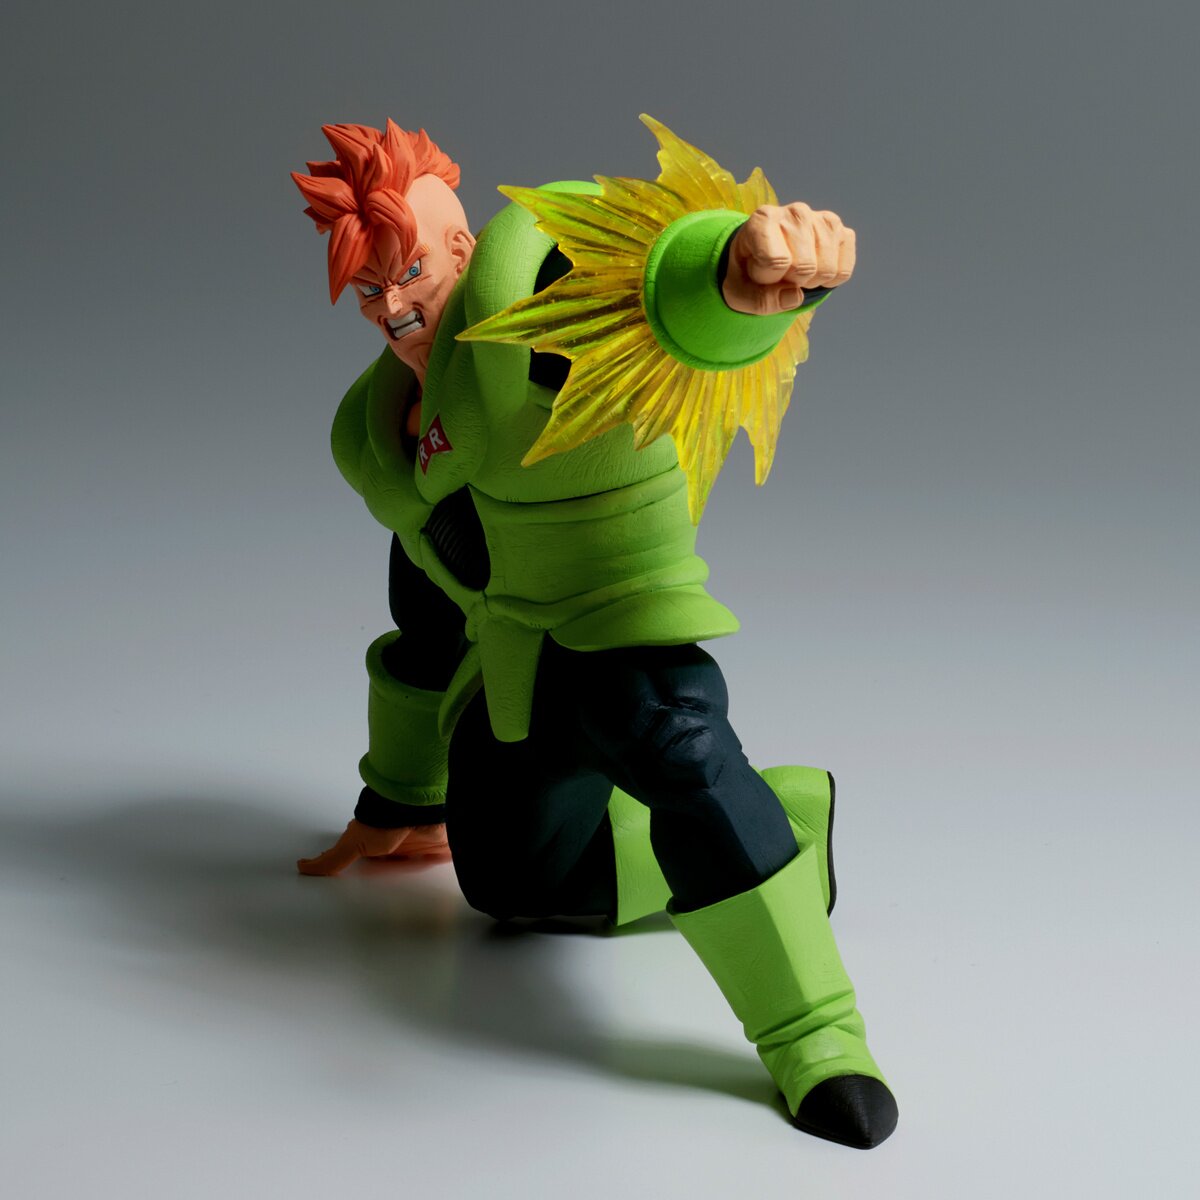 Dragon Ball Z Android 16 HSCF Figure high spec coloring JAPAN ANIME -  Japanimedia Store